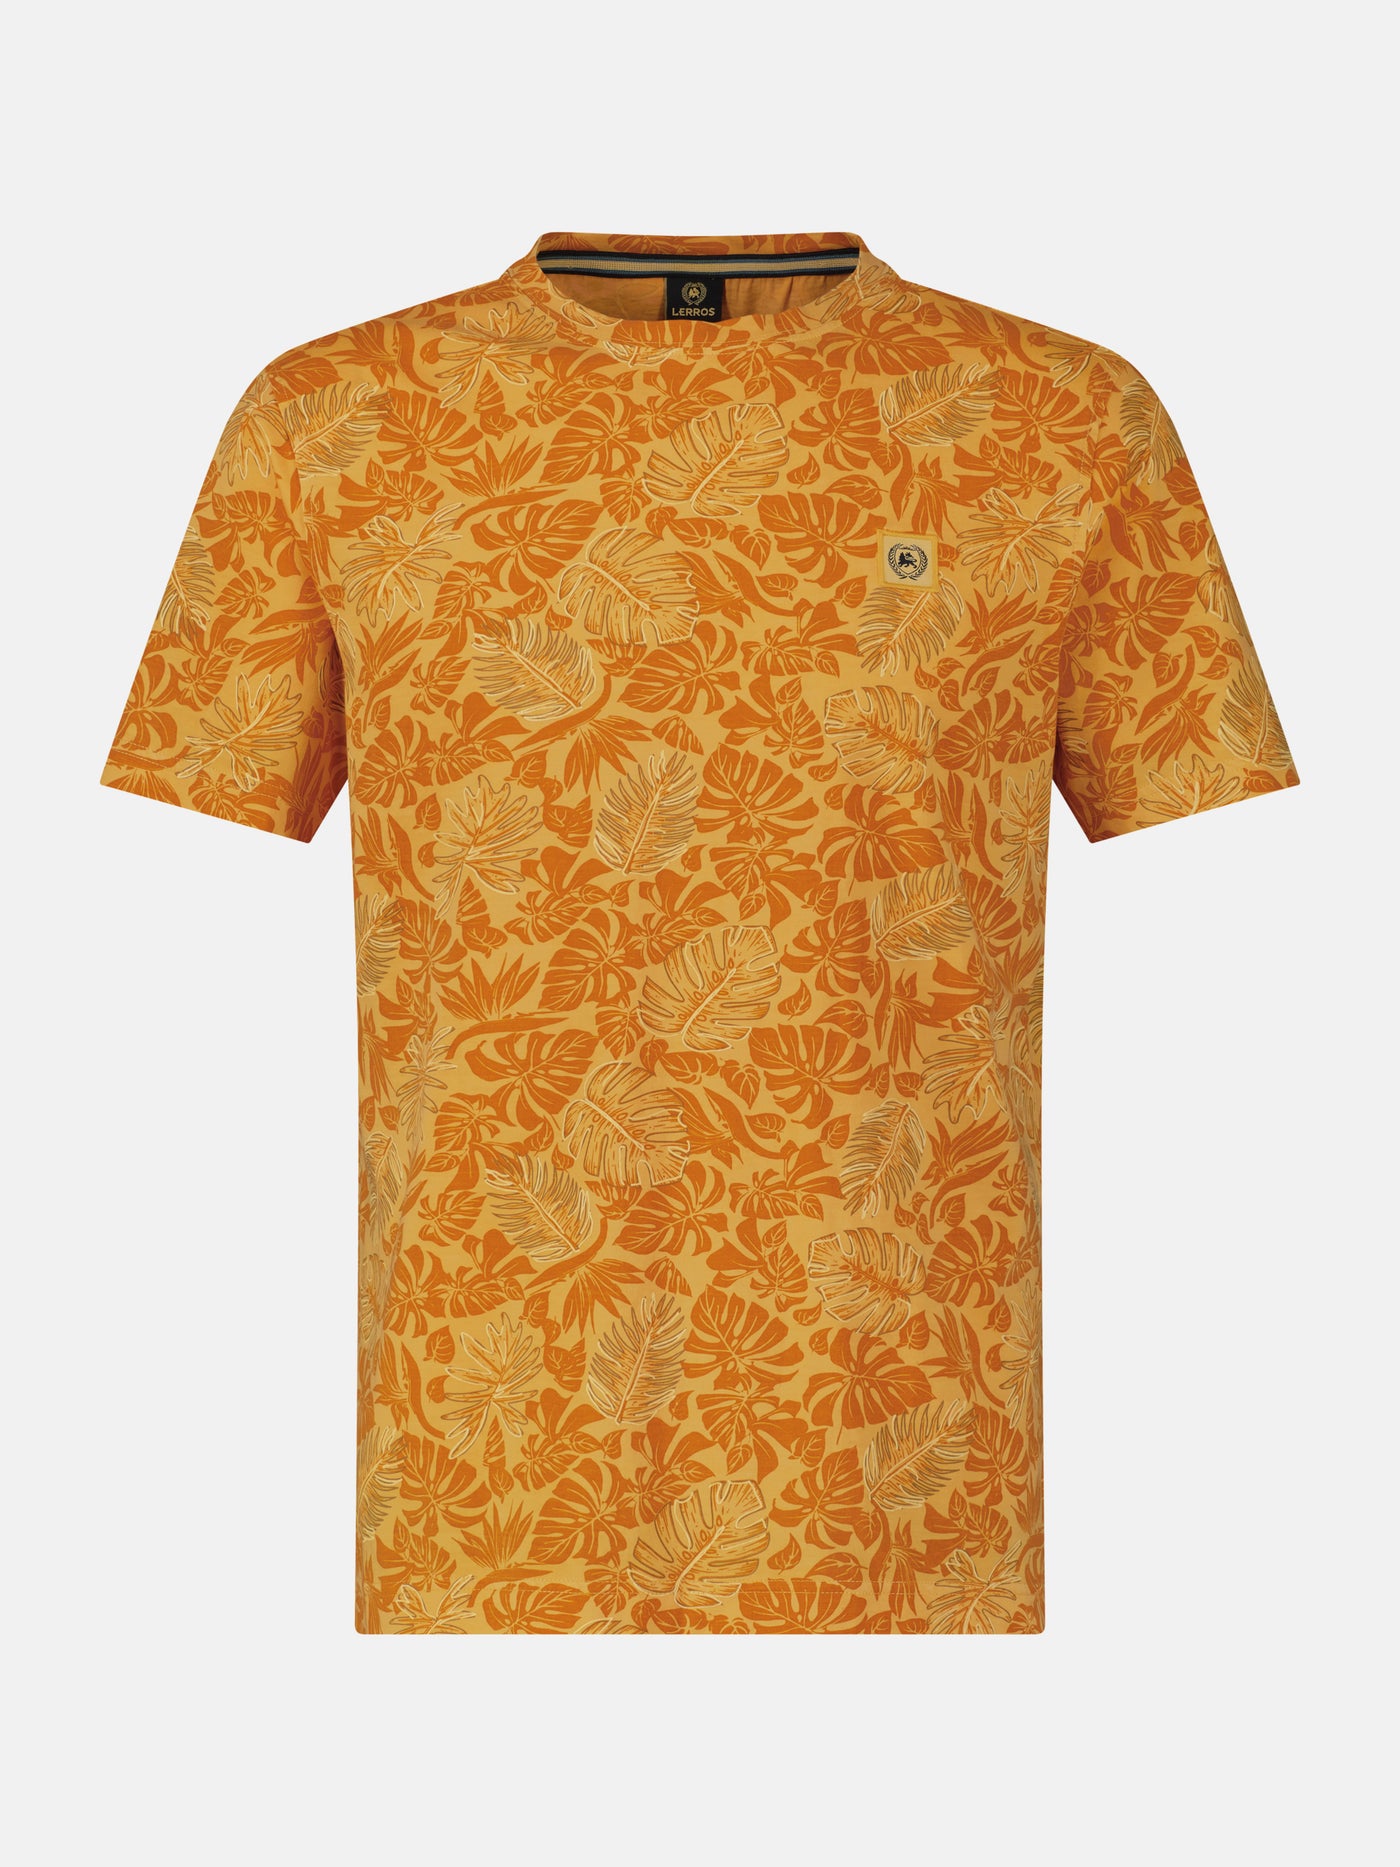 T-shirt for men with a floral print